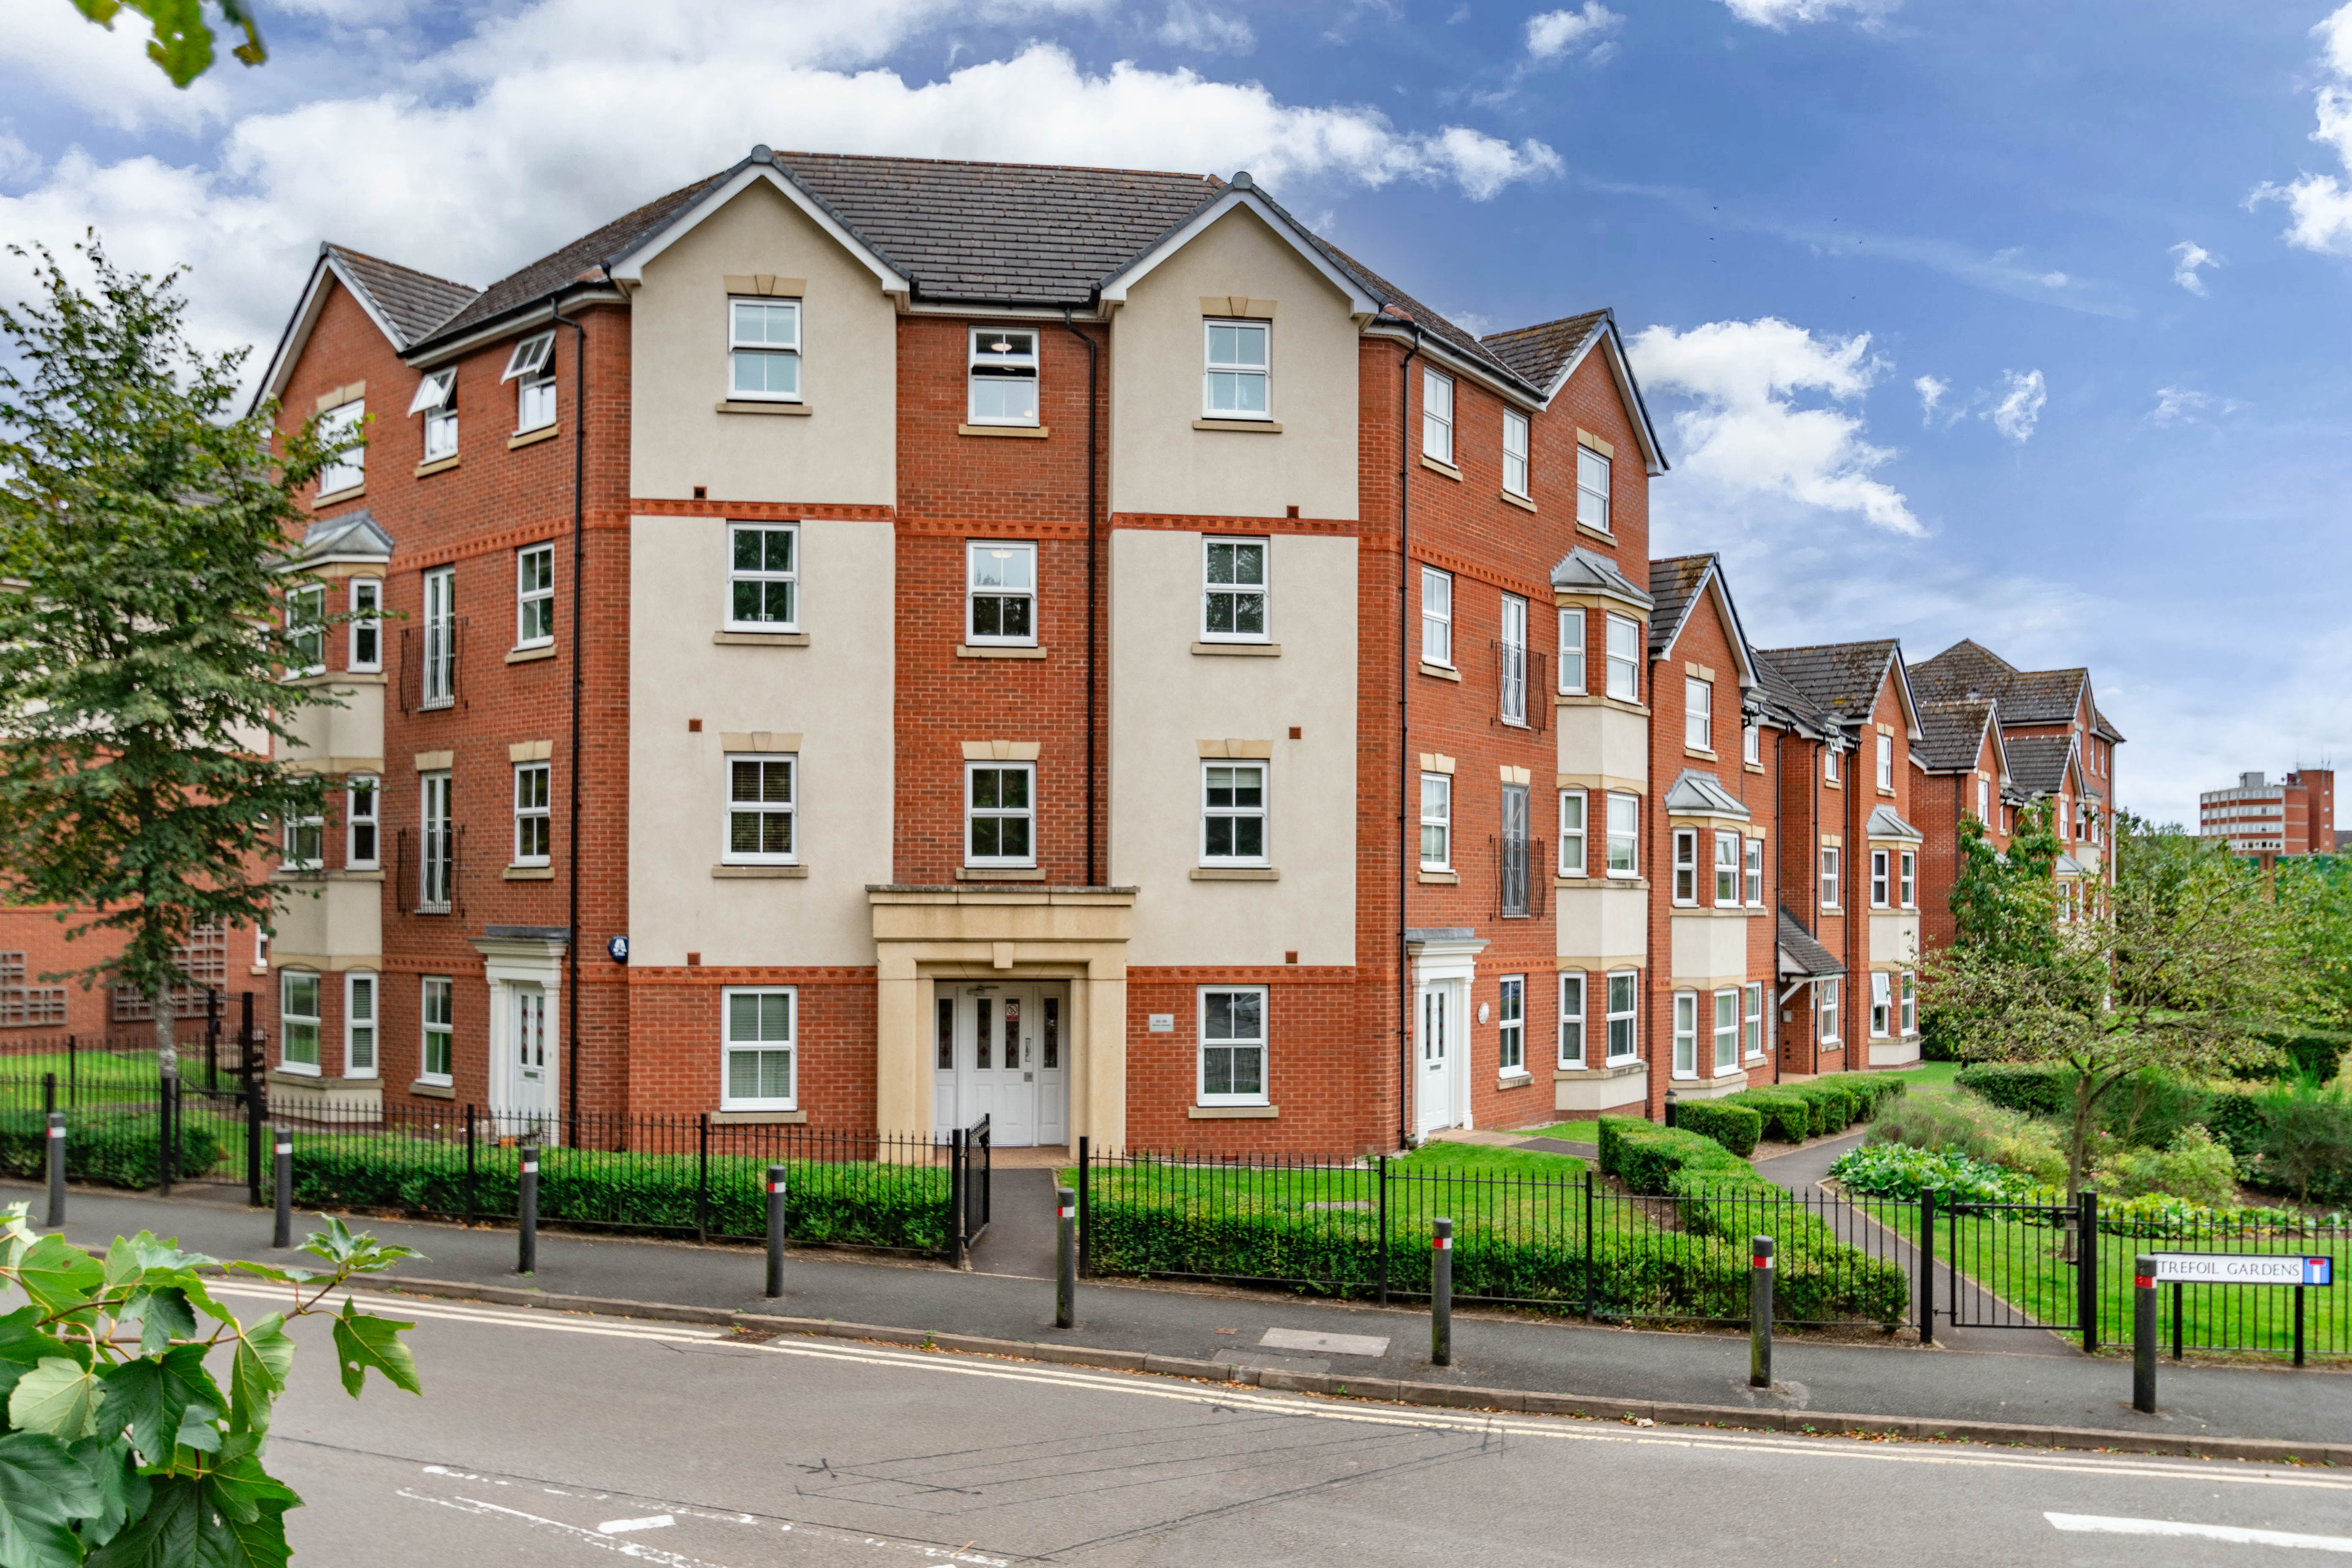 2 bed apartment to rent in Trefoil Gardens, Amblecote - Property Image 1